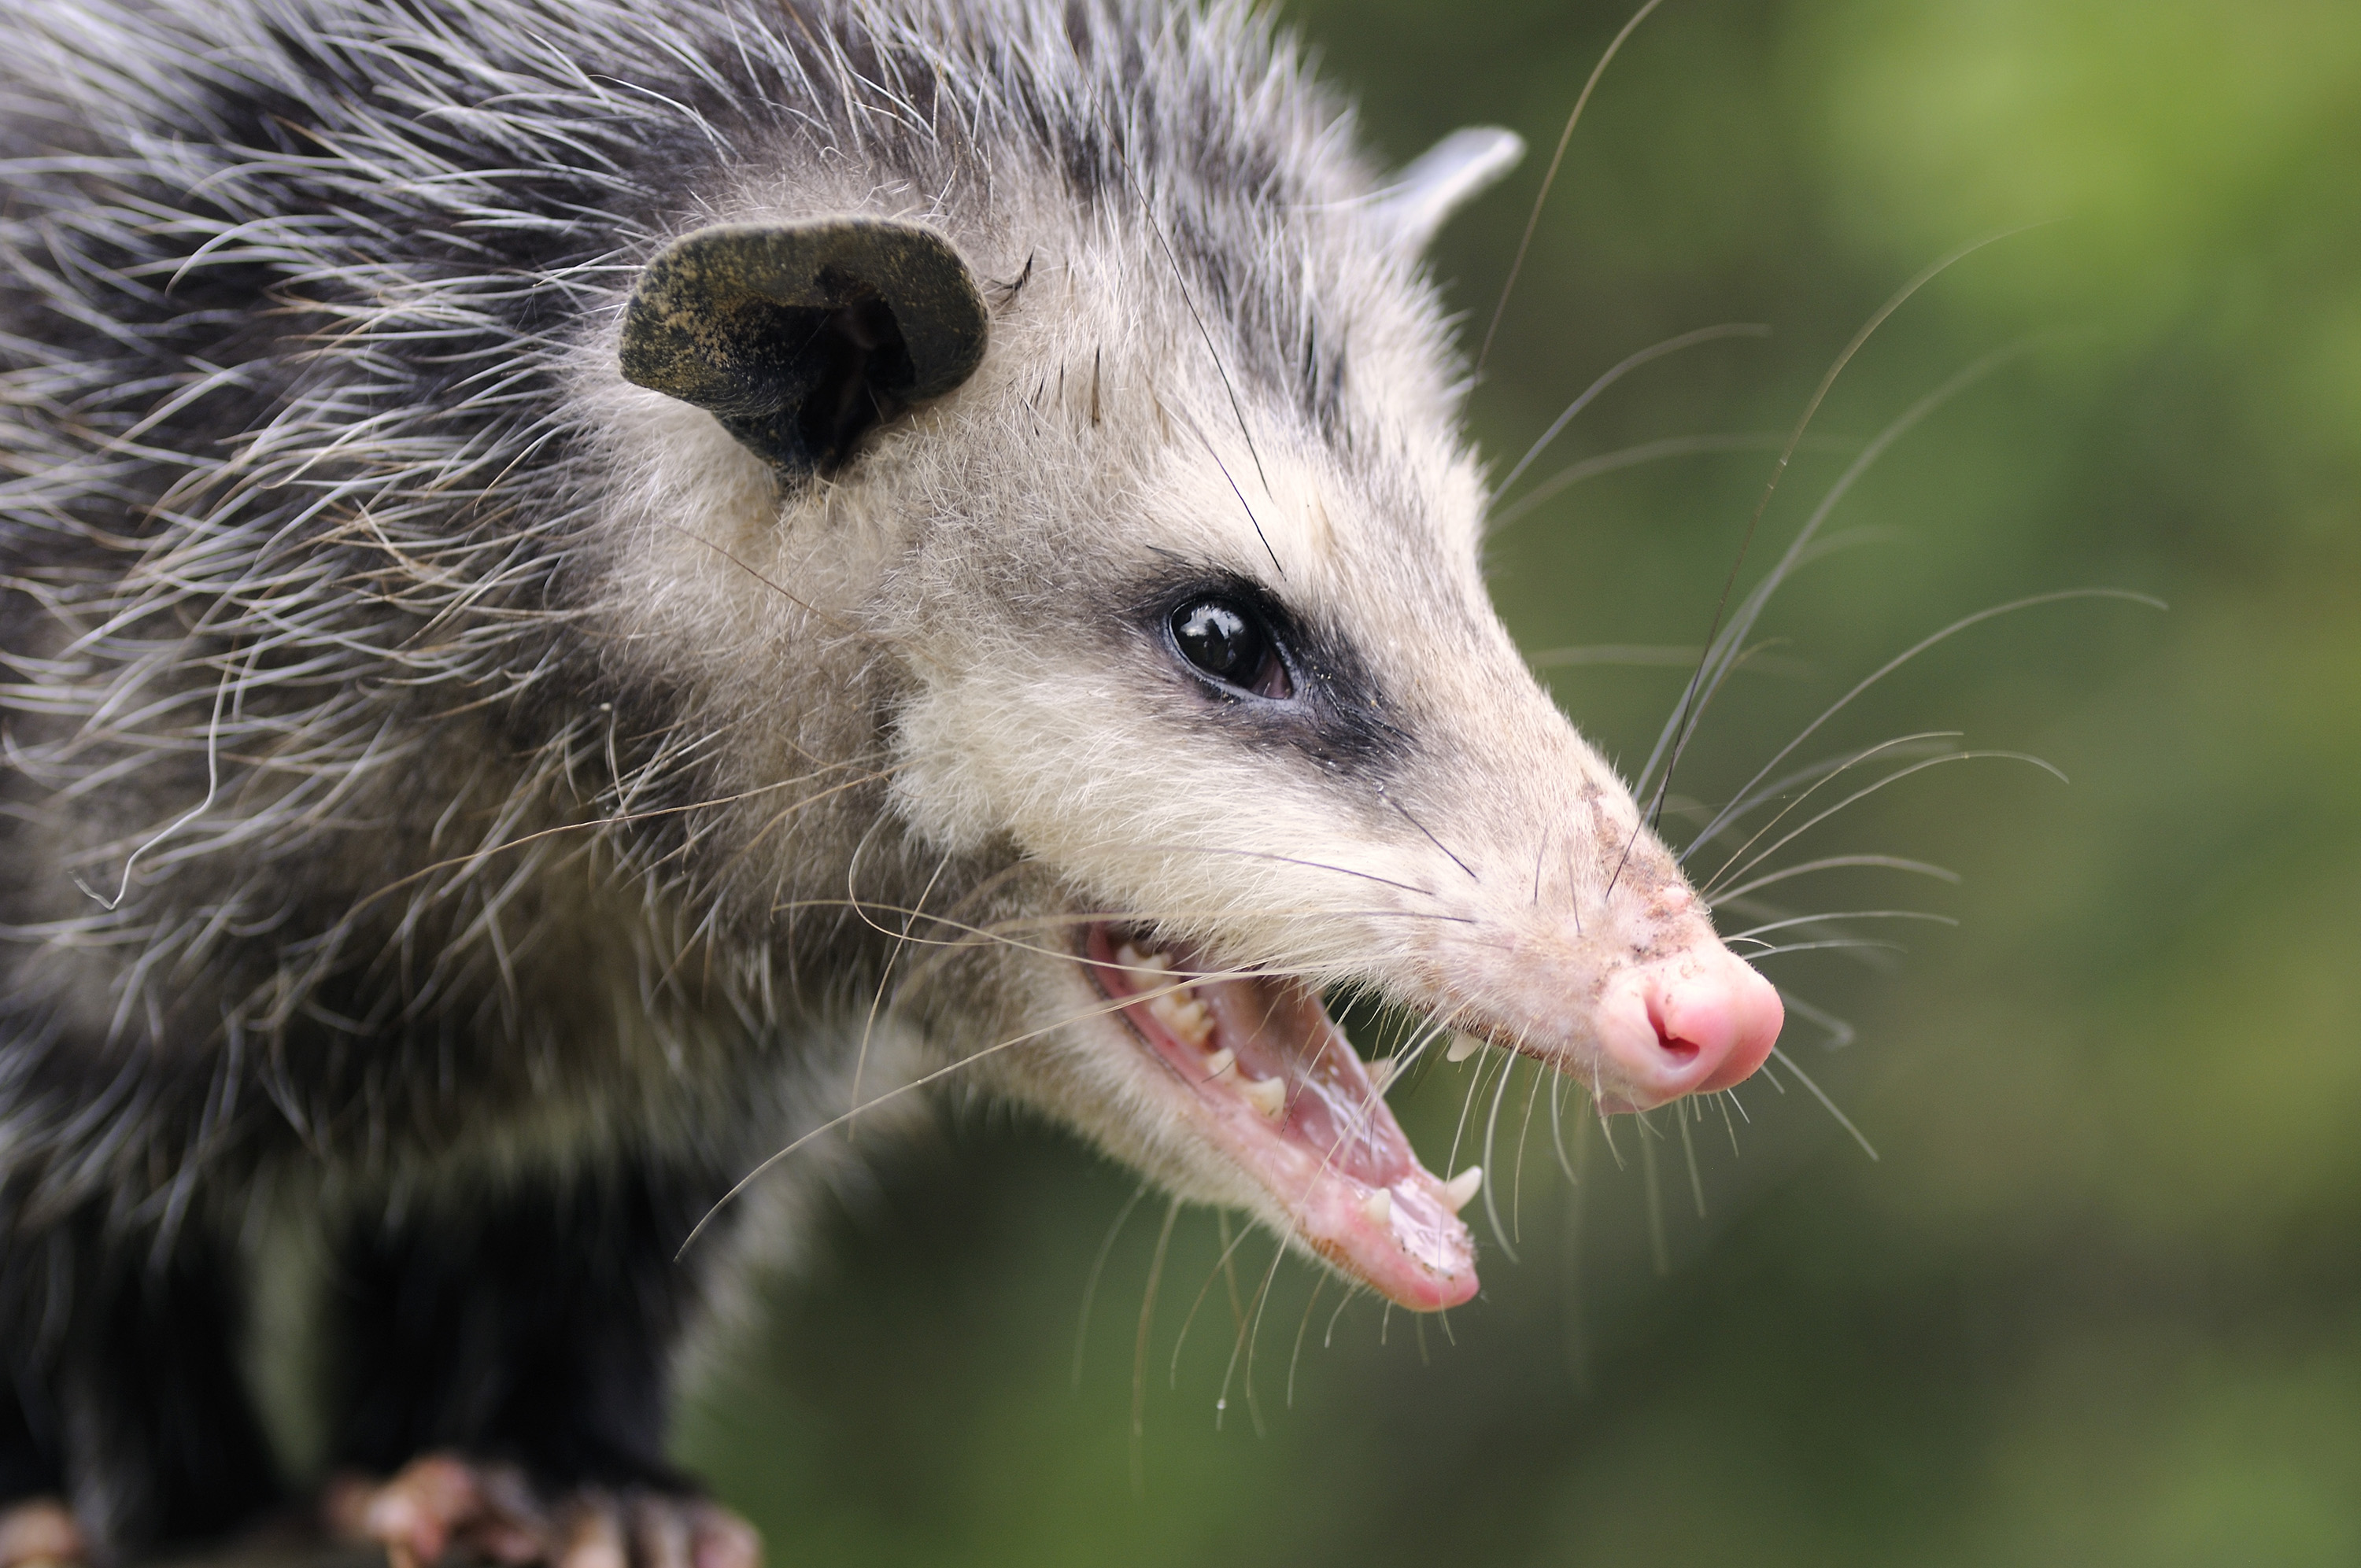 An opossum with its mouth open.